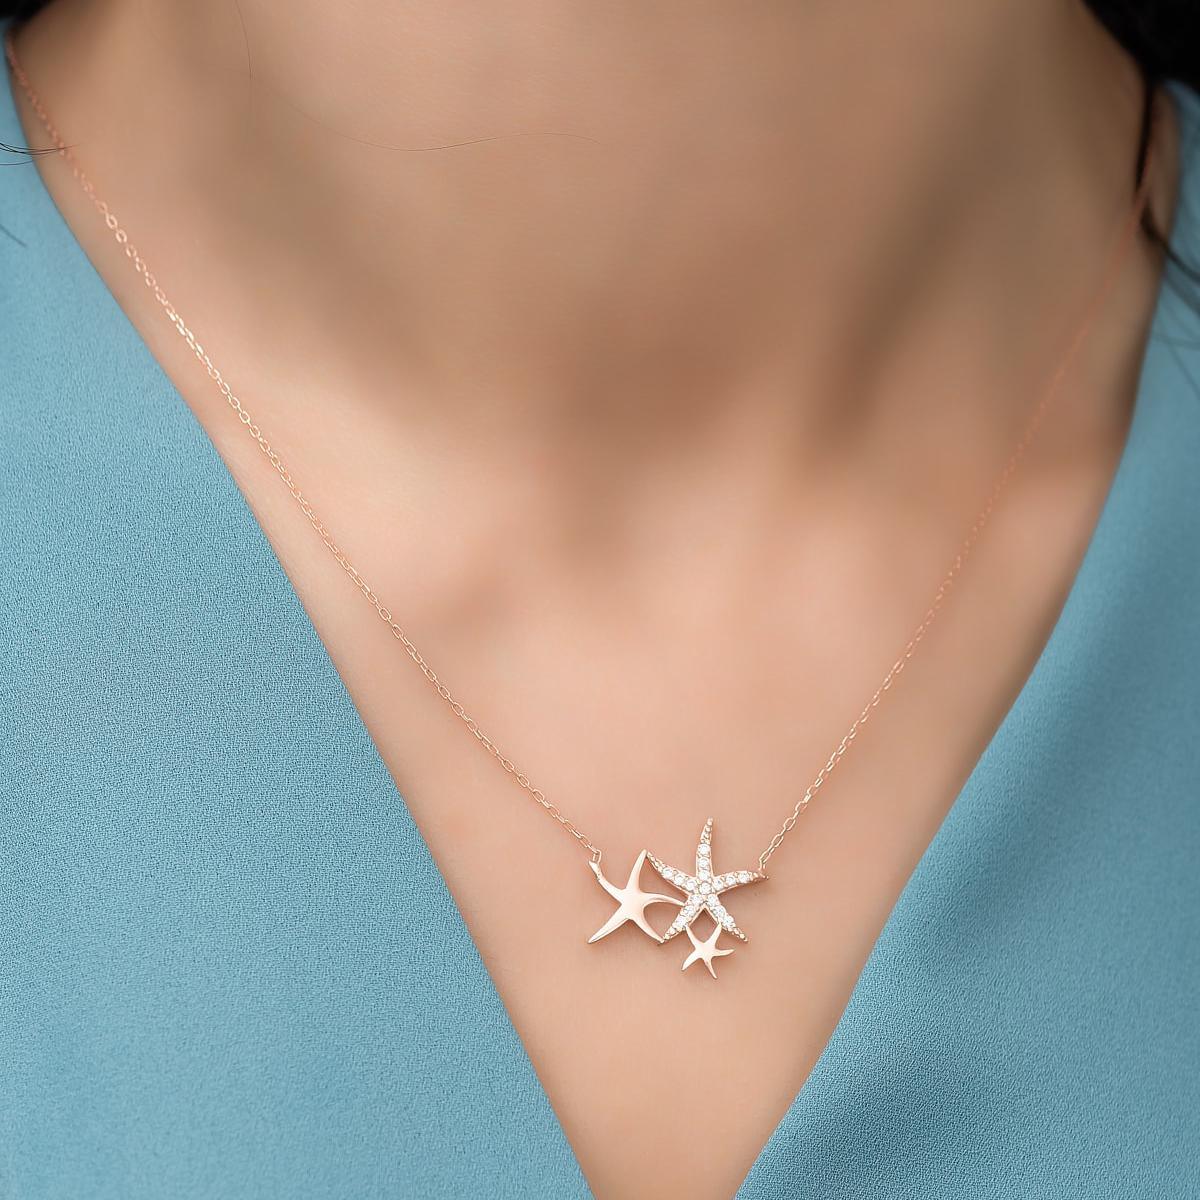 Diamond Starfish Necklace • Starfish Necklace Silver • Gift For Mom - Trending Silver Gifts